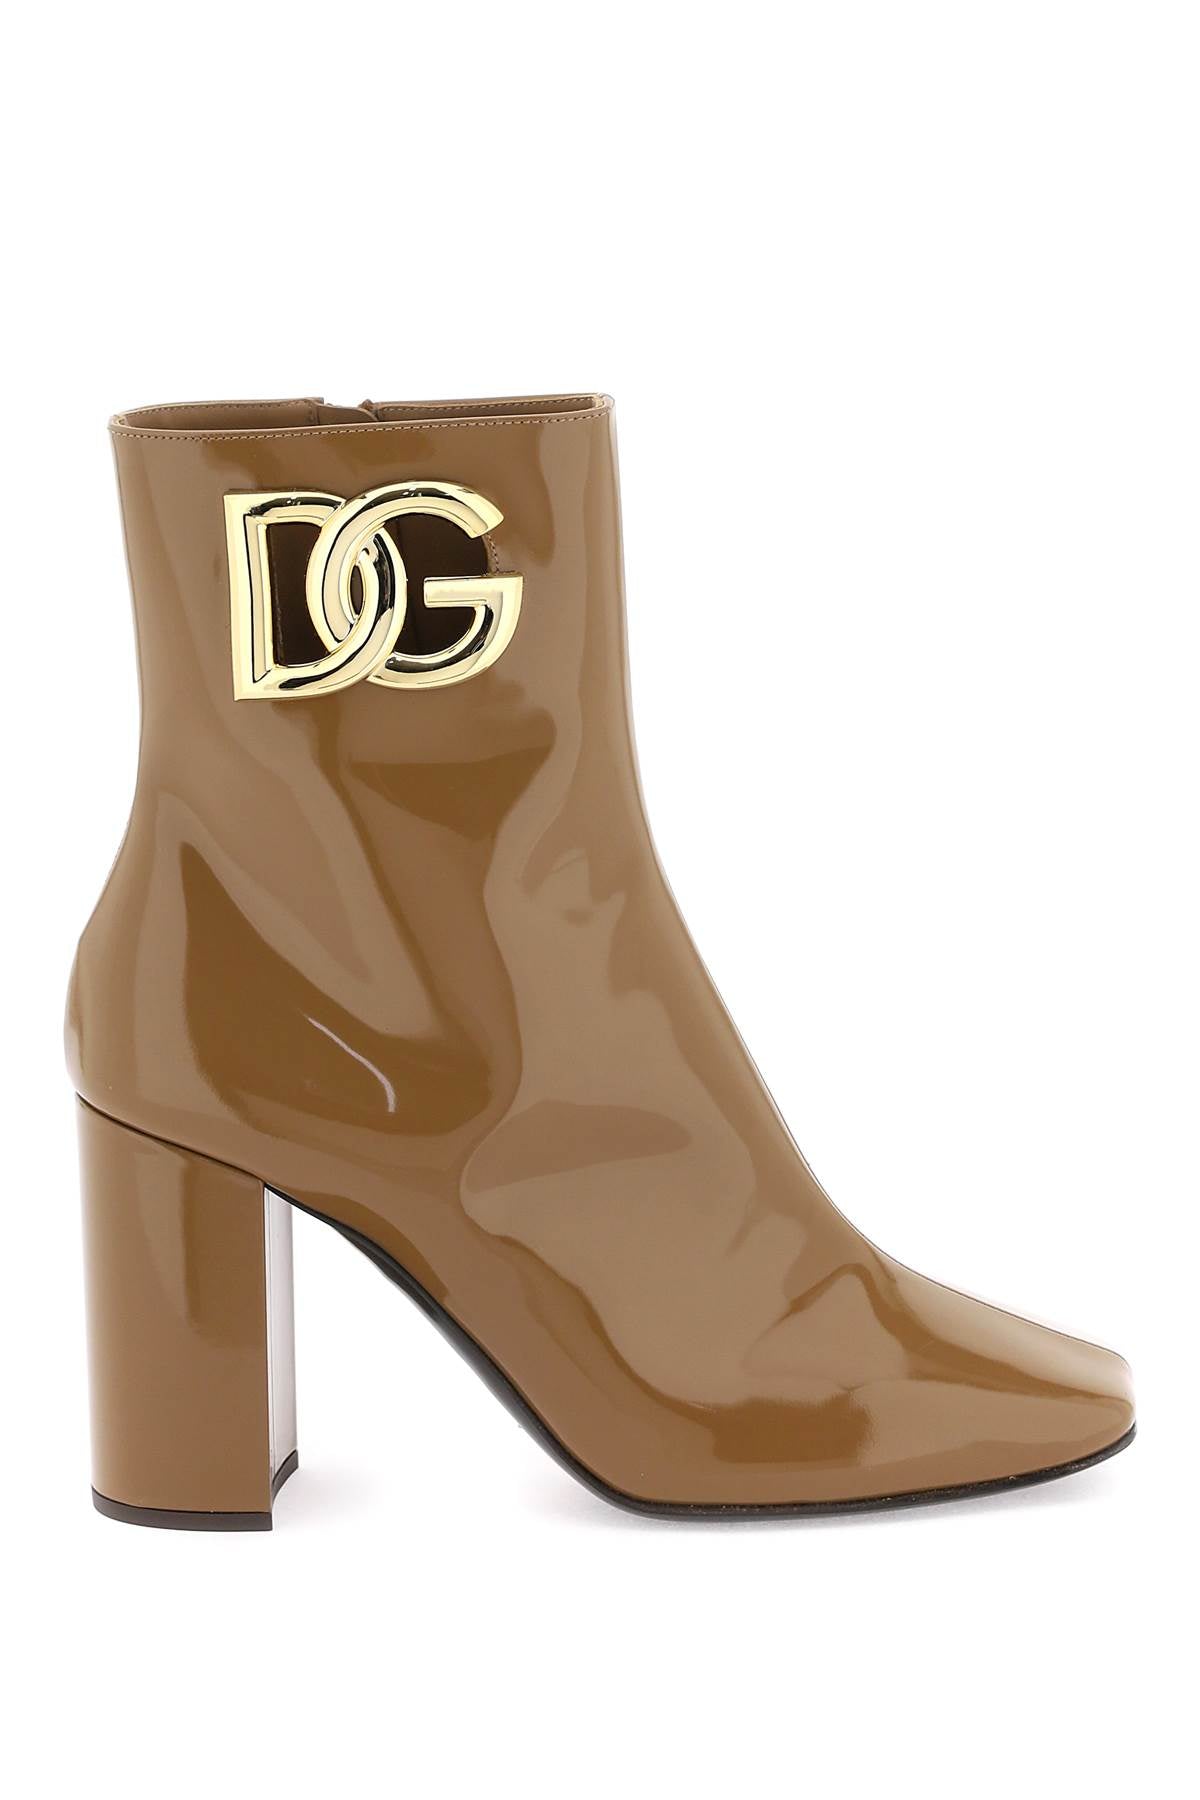 Shop Dolce & Gabbana Glossy Leather Ankle Boots With Gold Metal Dg Logo For Women In Brown